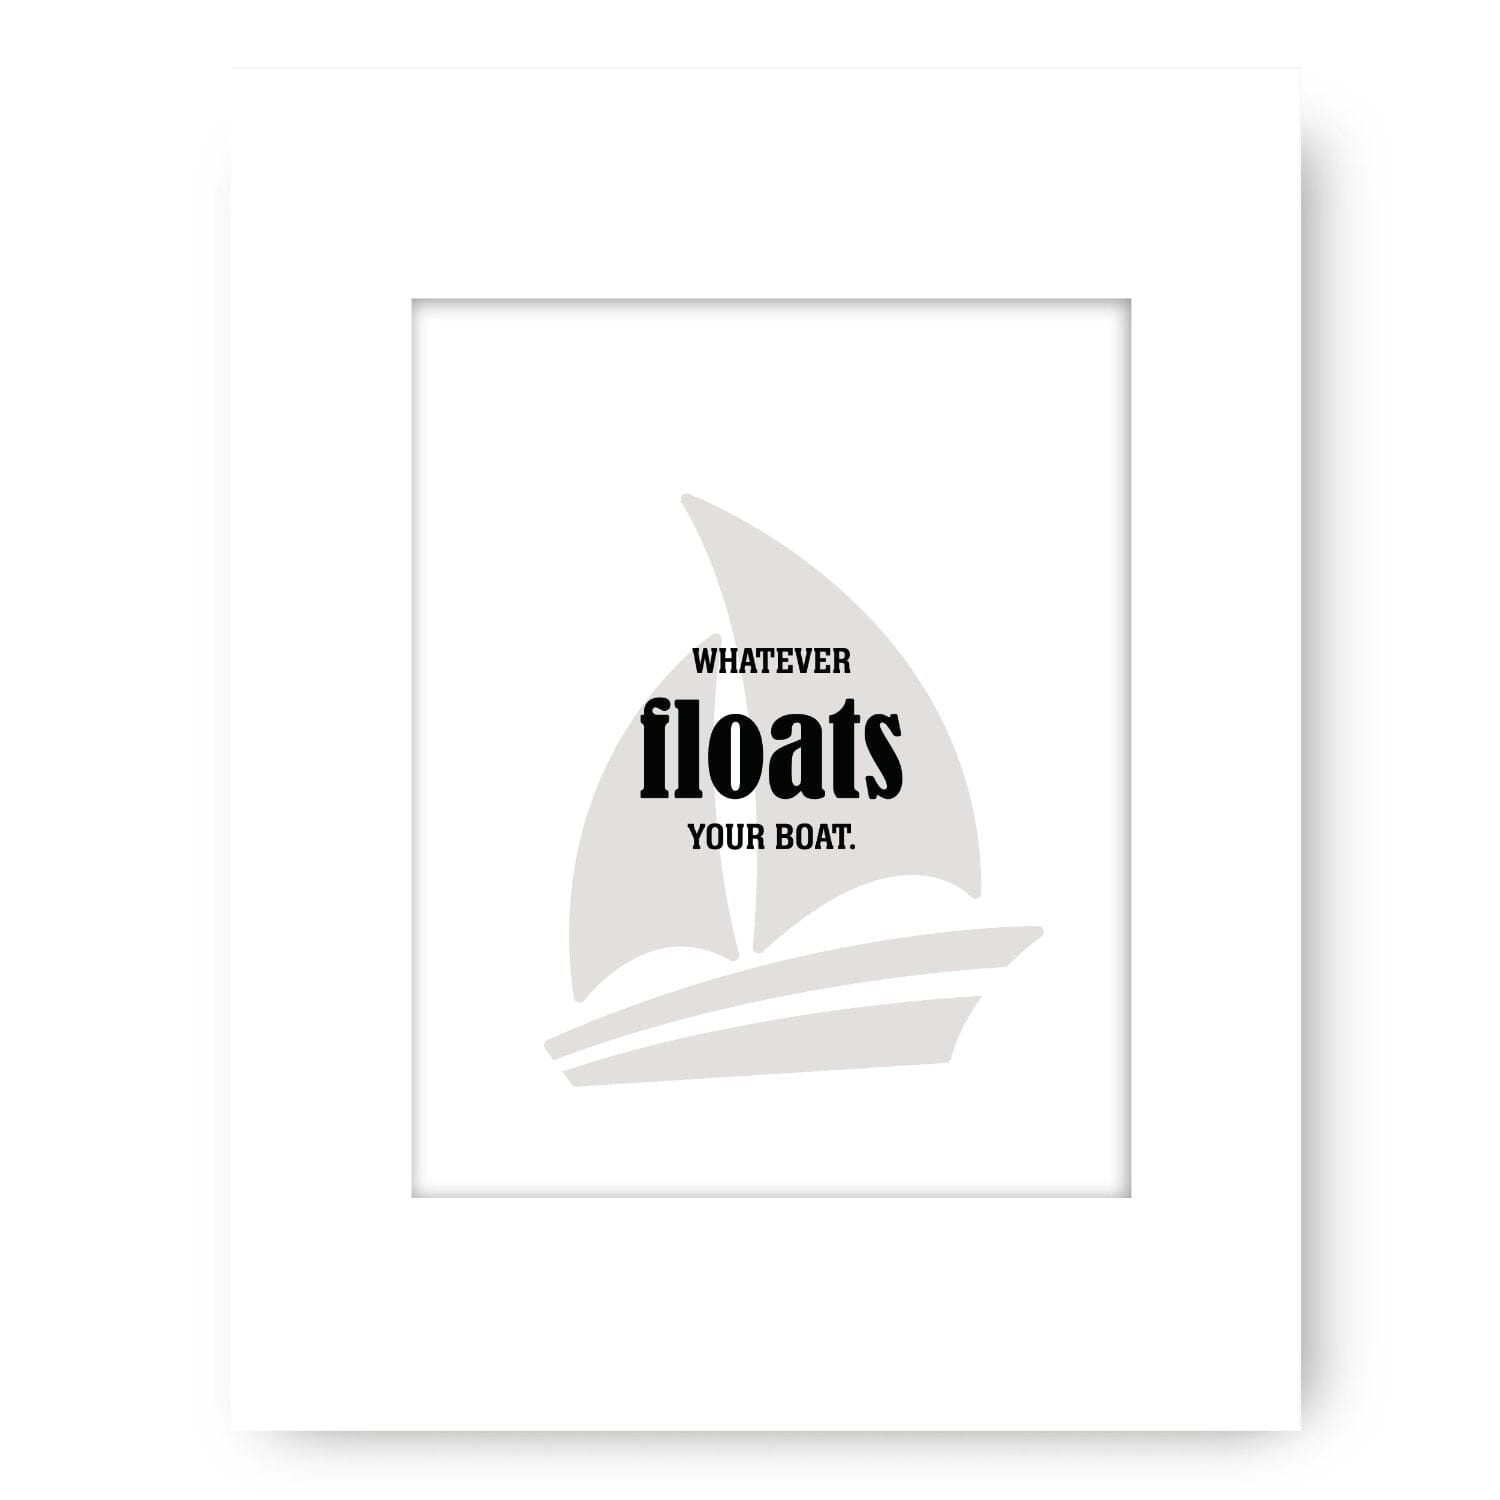 Whatever Floats Your Boat - Wise and Witty Wall Print Art Wise and Wiseass Quotes Song Lyrics Art 8x10 Unframed White Matted Print 